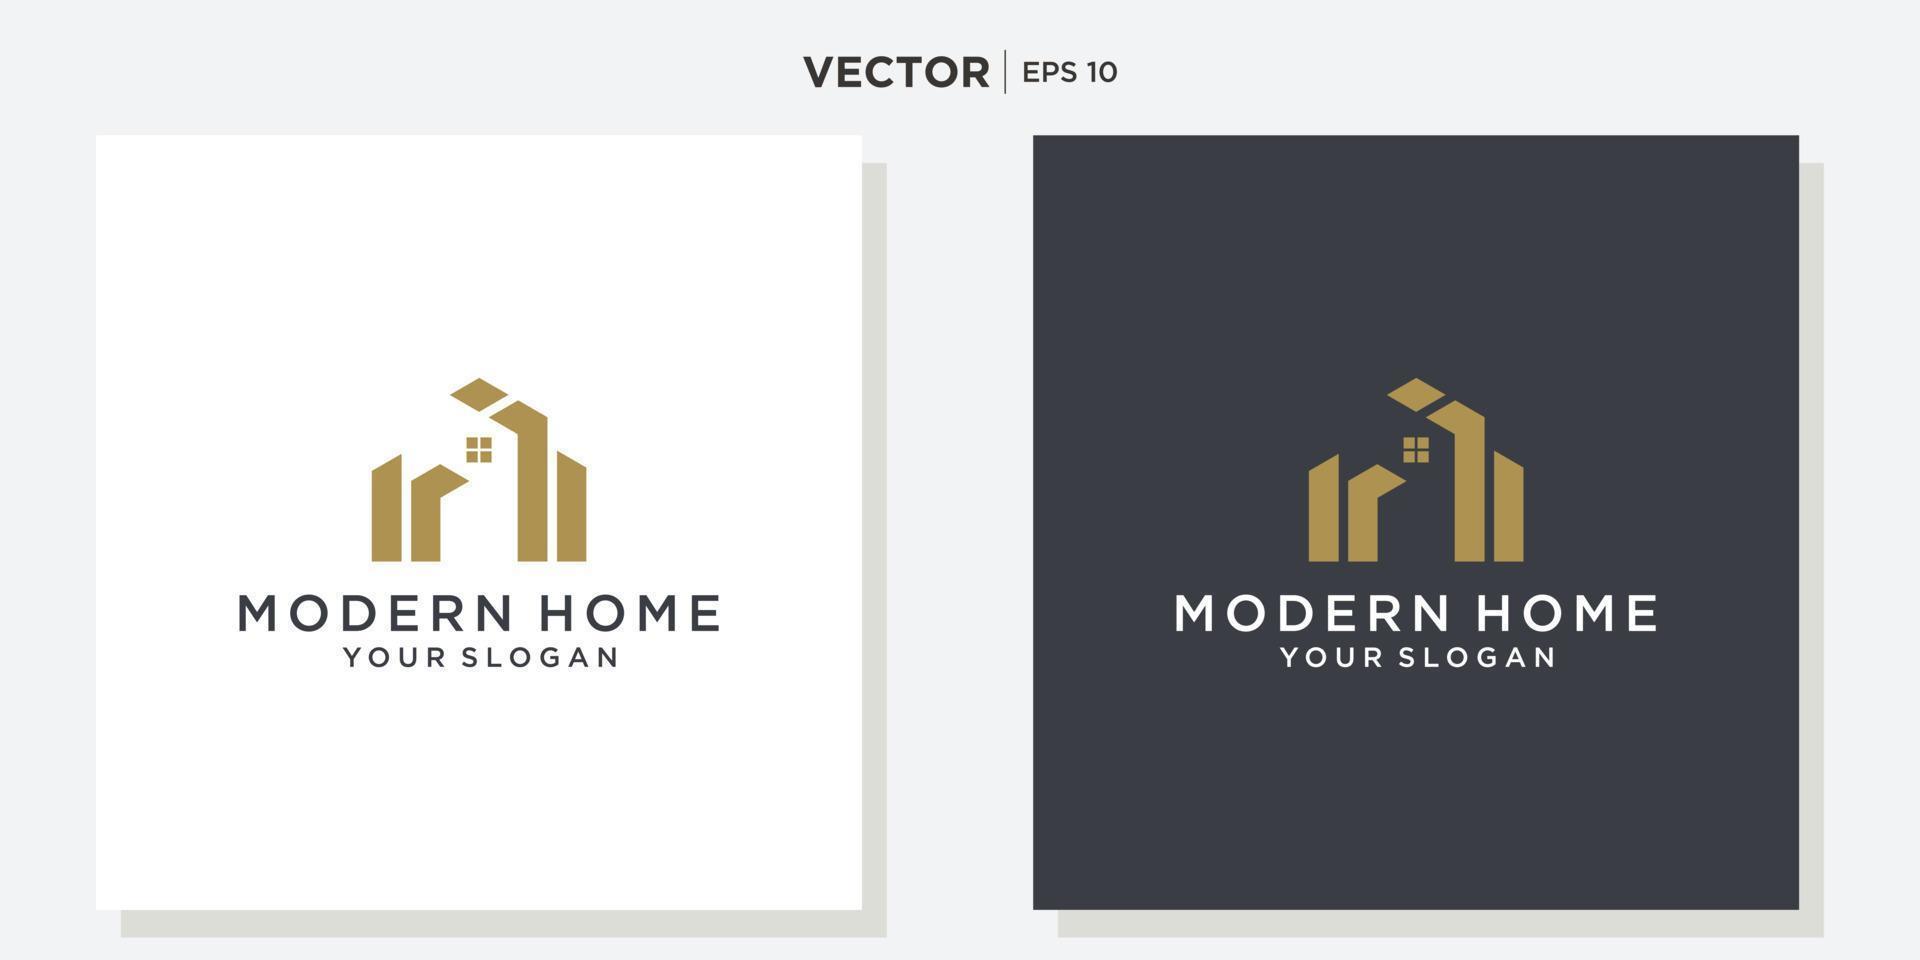 House Logo. Gold House Symbol Geometric Linear Style isolated on Double Background. Usable for Real Estate, Construction, Architecture and Building Logos. vector